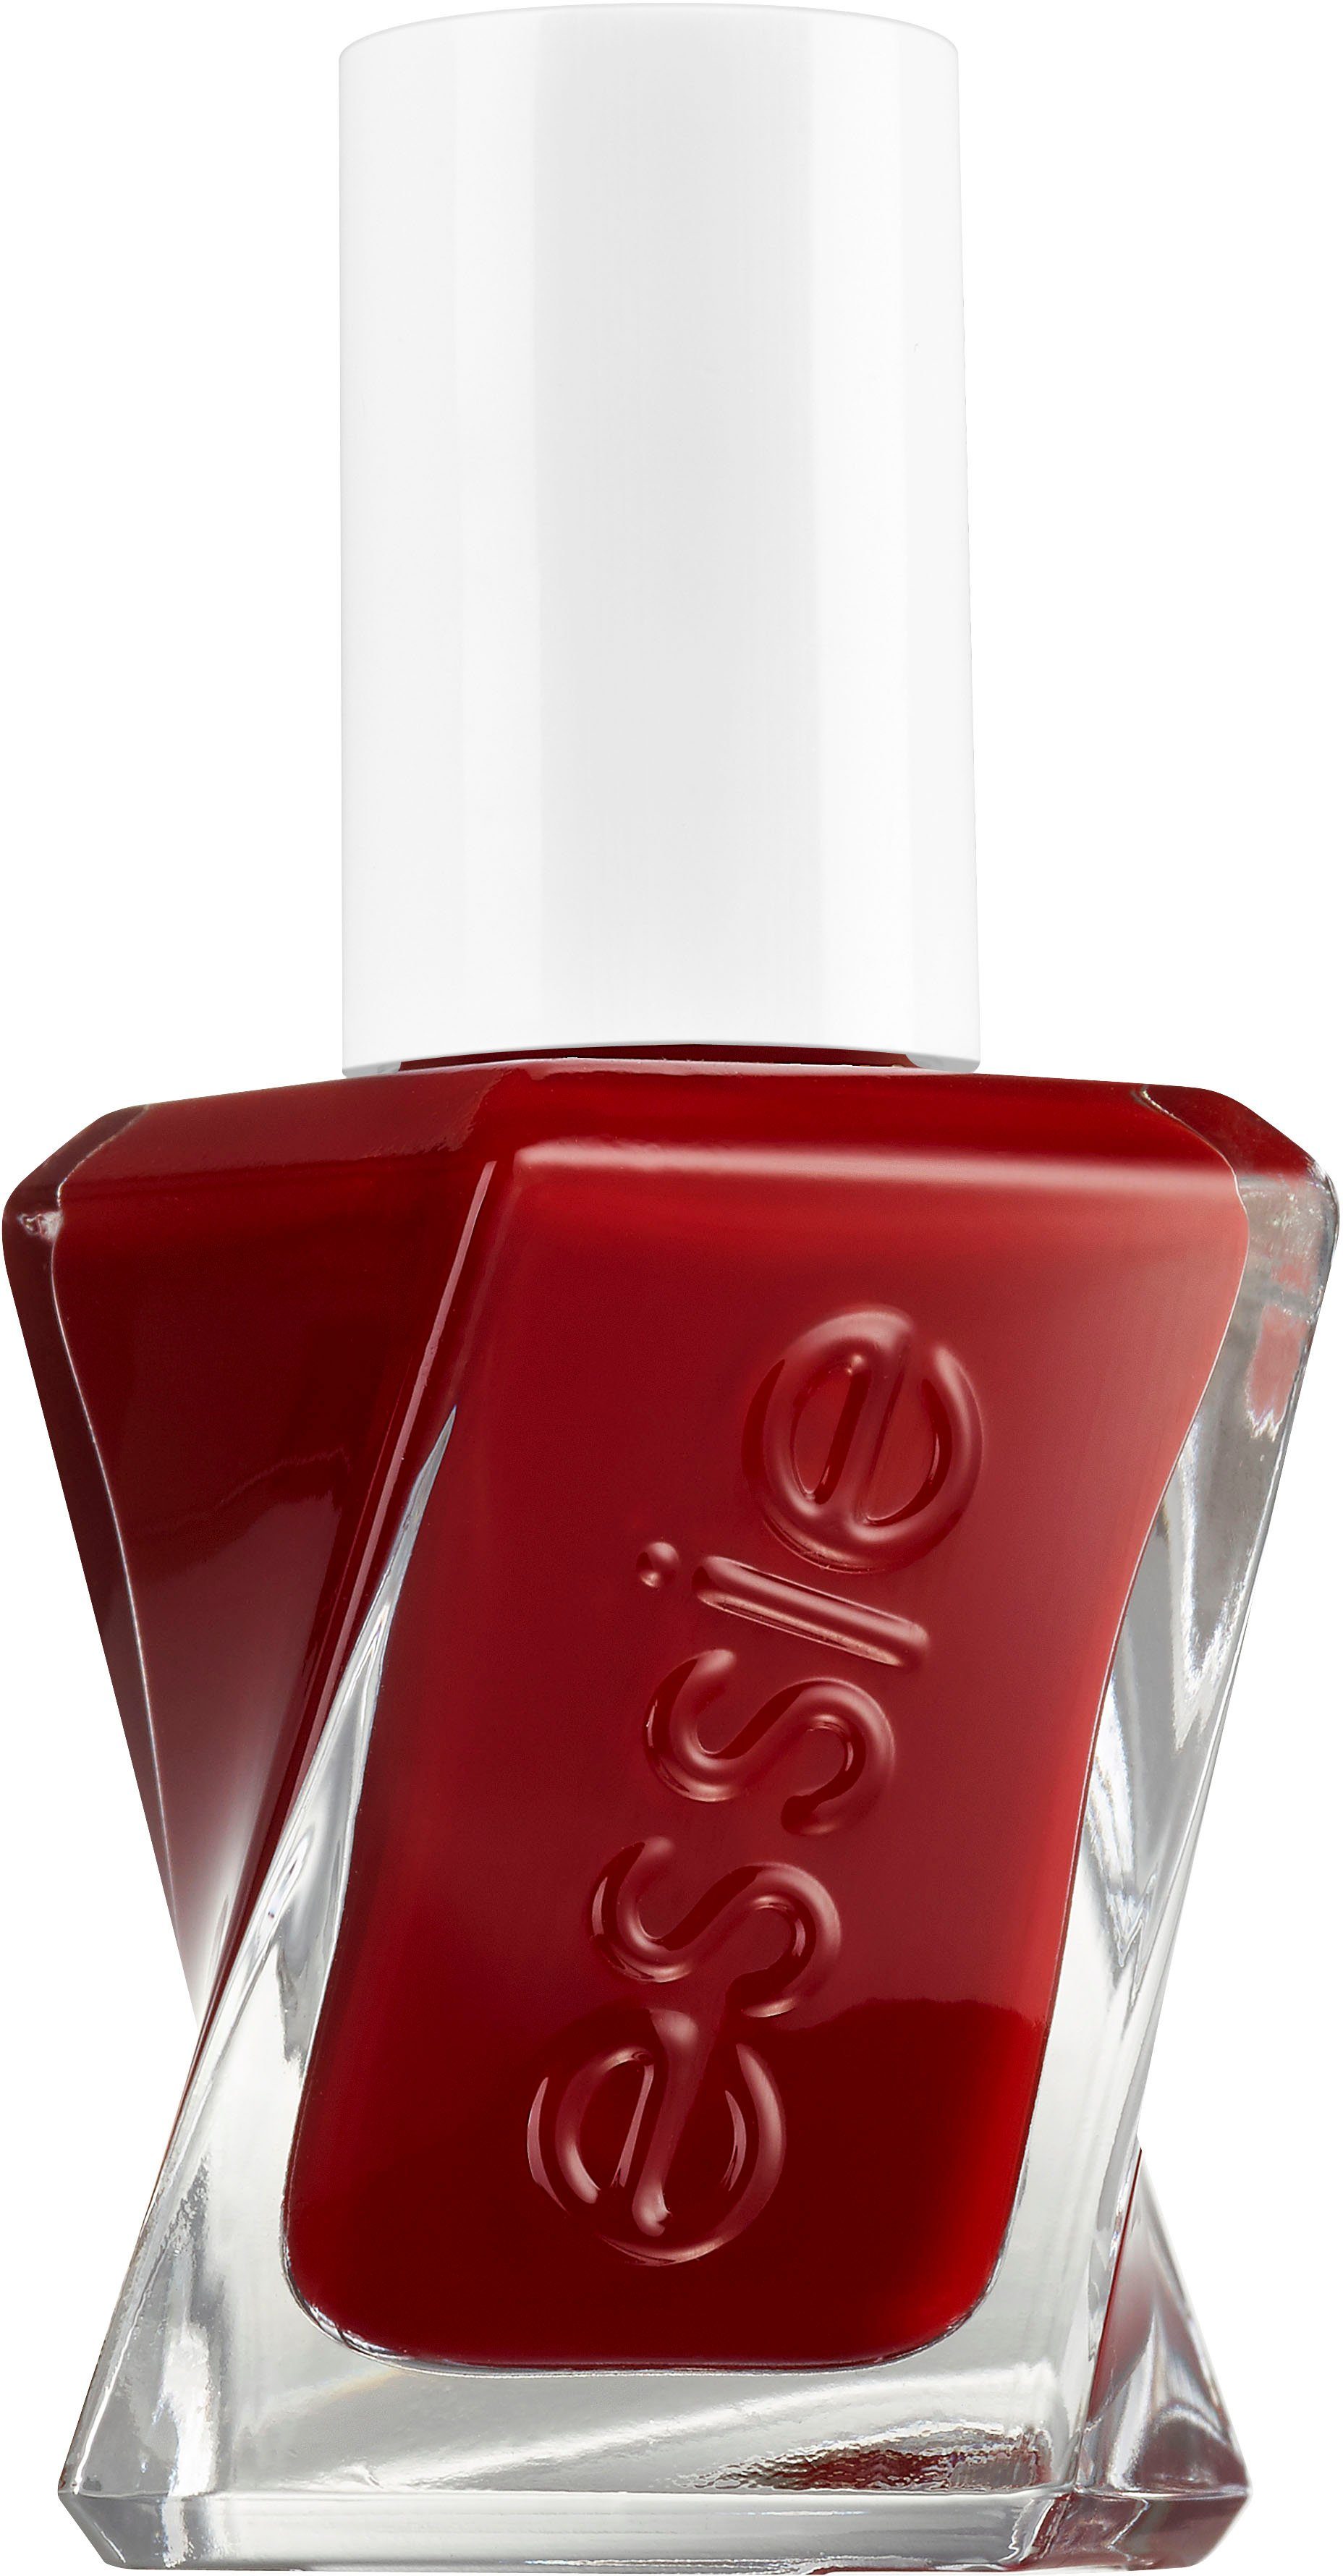 bubbles Gel-Nagellack Nr. only essie Couture Rot Gel 345